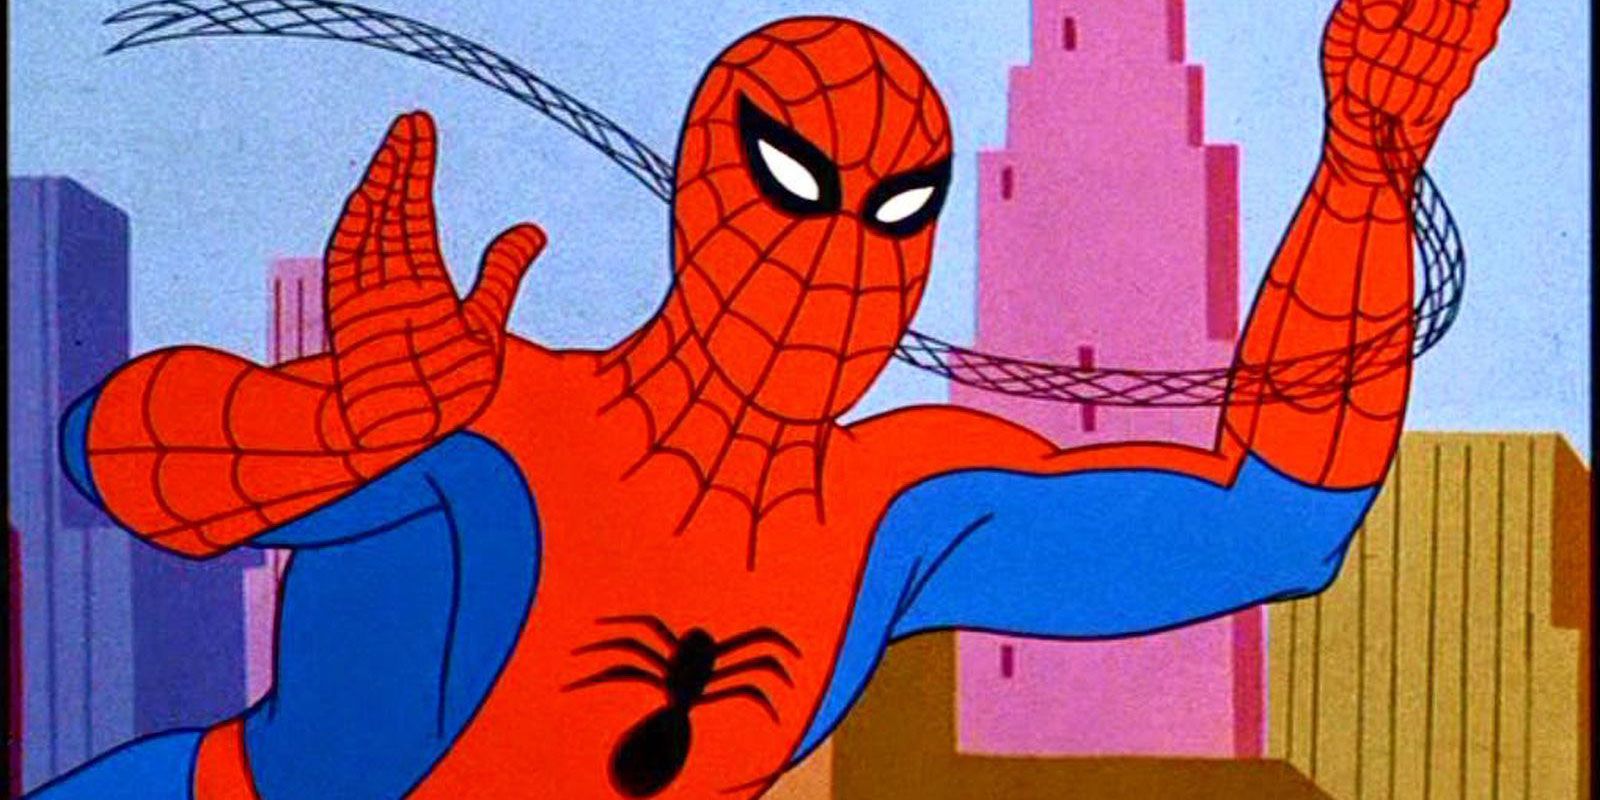 Spider-Man swings and waves to the viewer in the 67 animated series